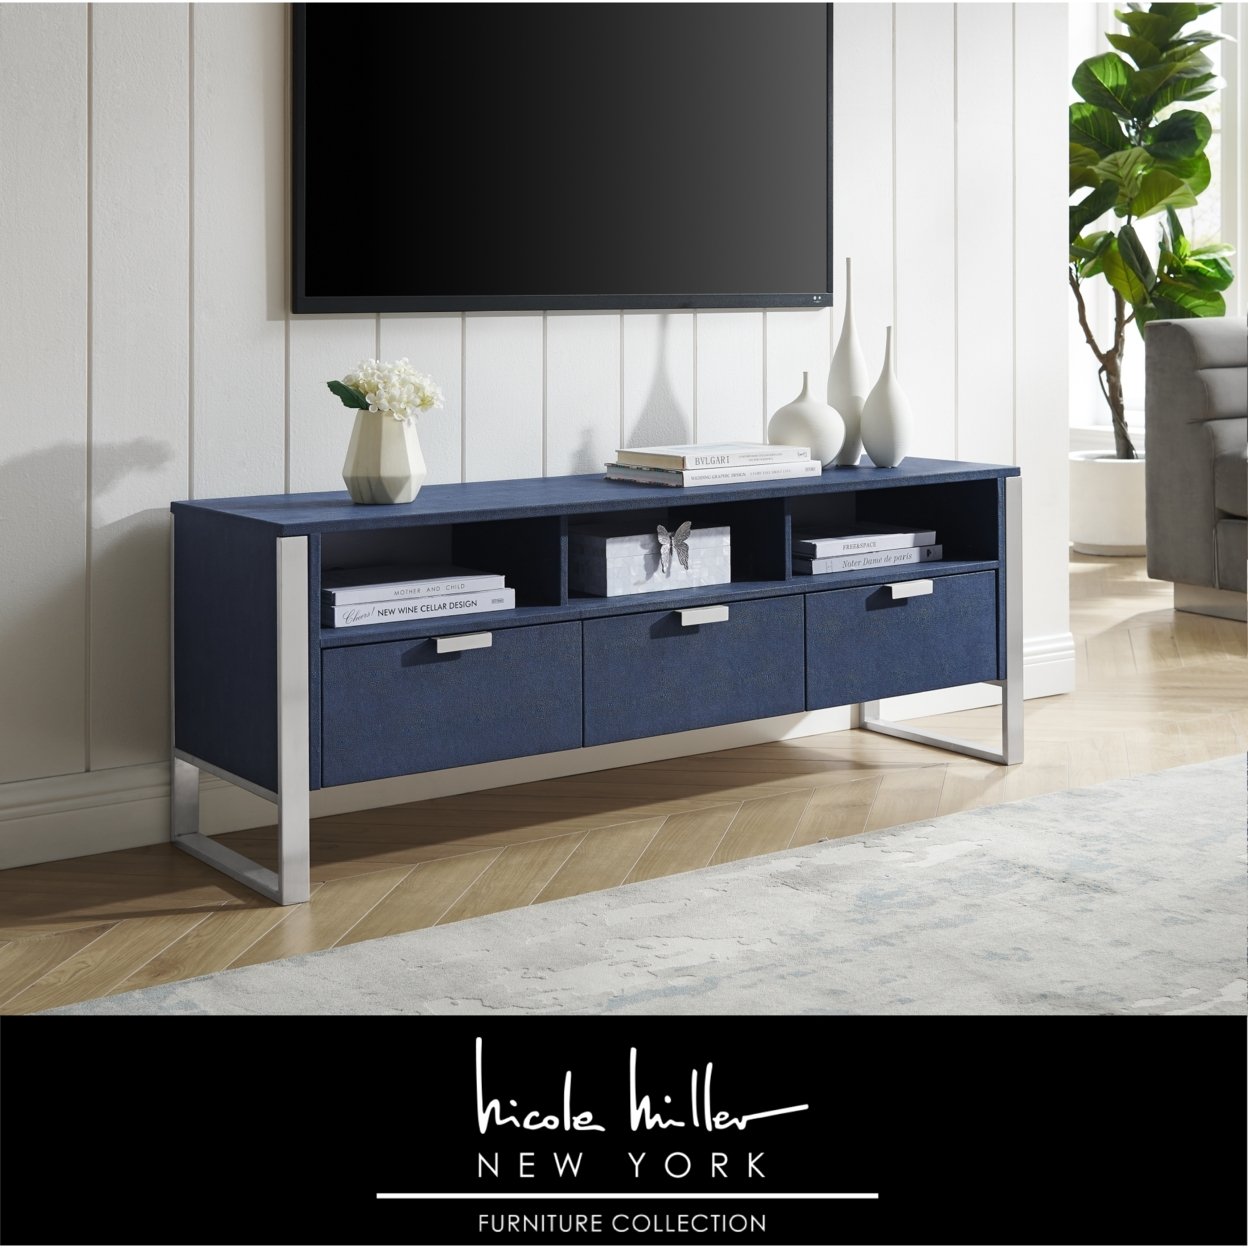 Isidro TV Stand - 3 Drawers , Brushed Gold/Chrome Base And Handles , Stainless Steel Base - Cream White/gold